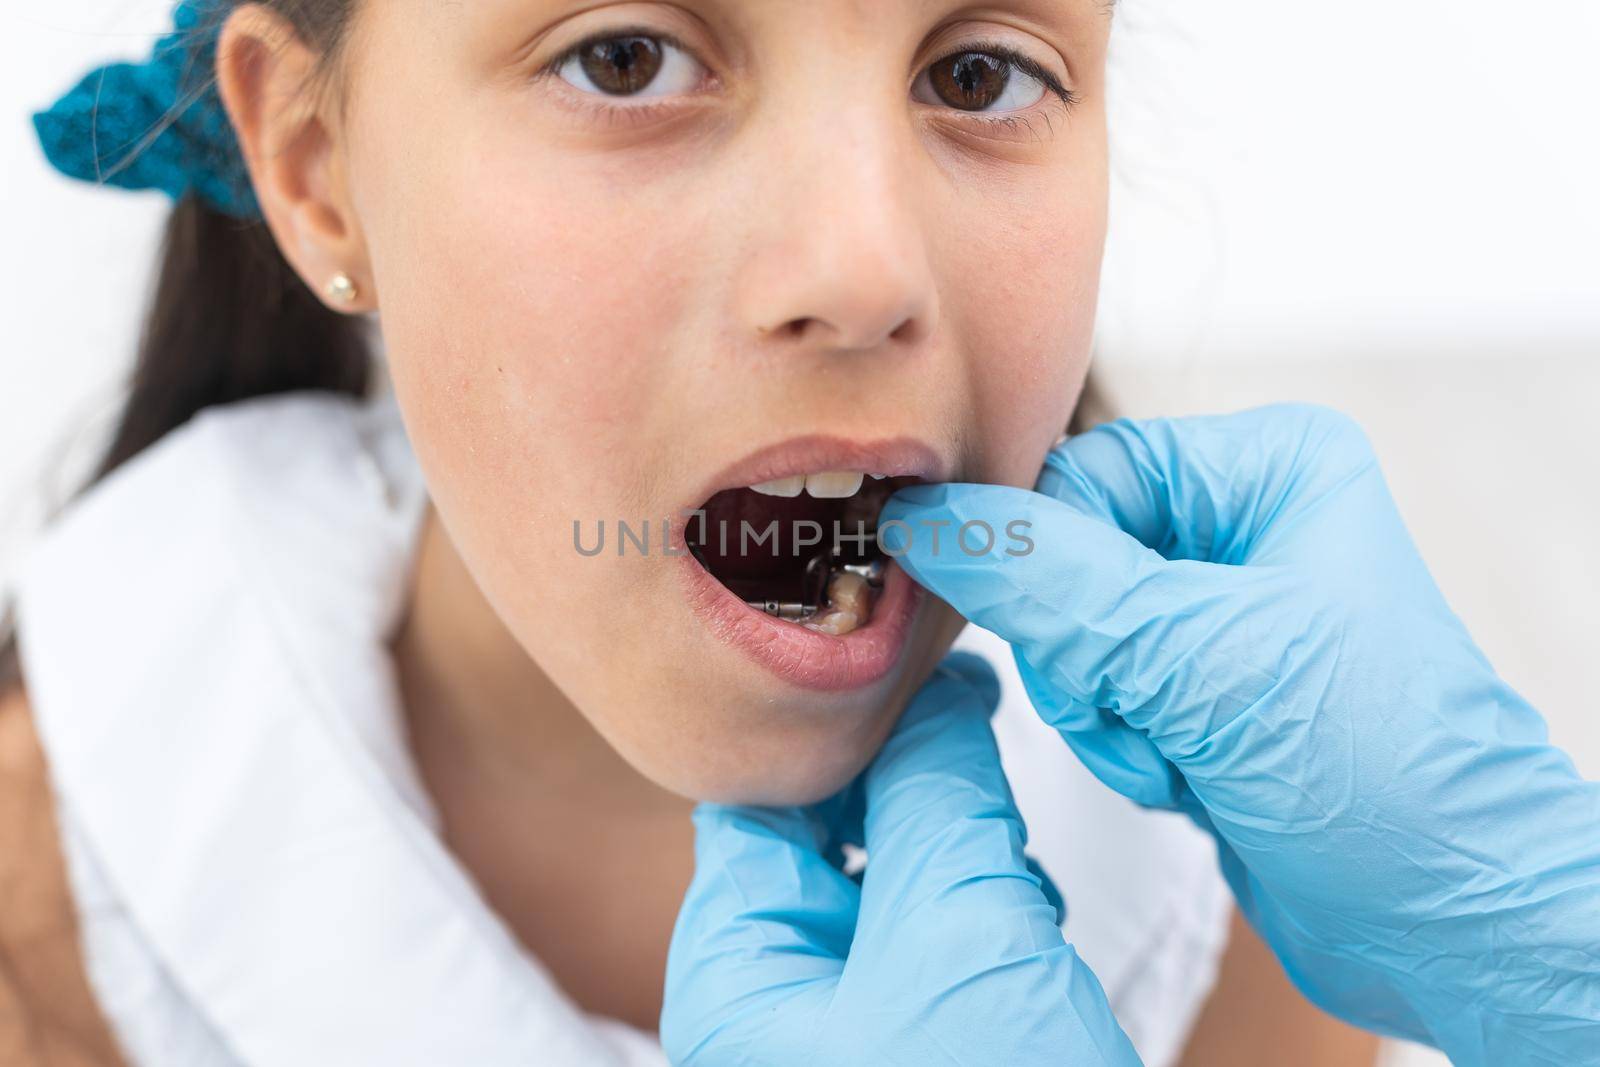 Dentist is check and set dimension of brackets. Talking to girl about braces in her mouth by Andelov13